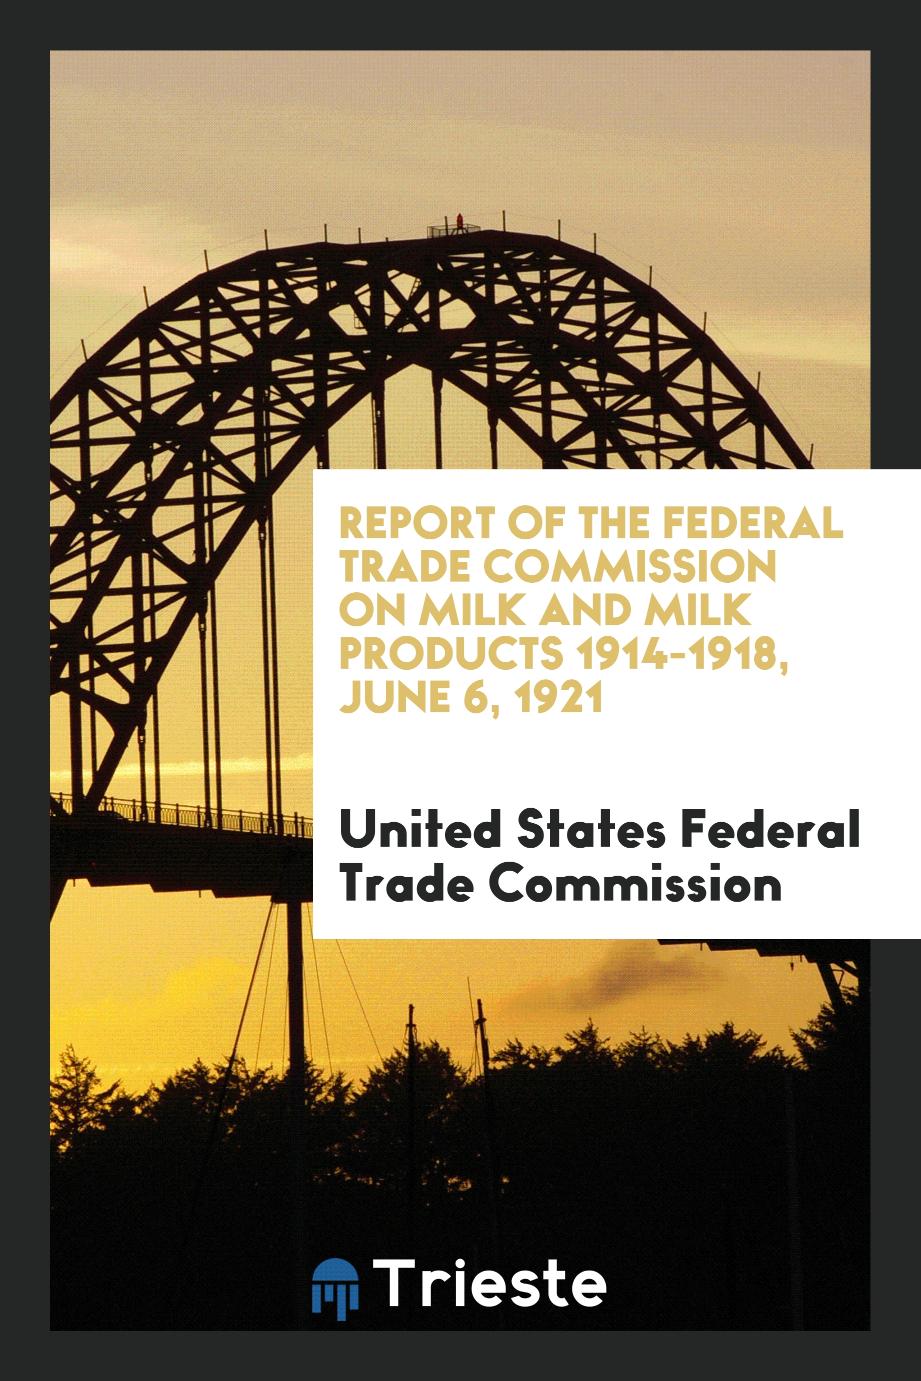 Report of the Federal Trade Commission on Milk and Milk Products 1914-1918, June 6, 1921